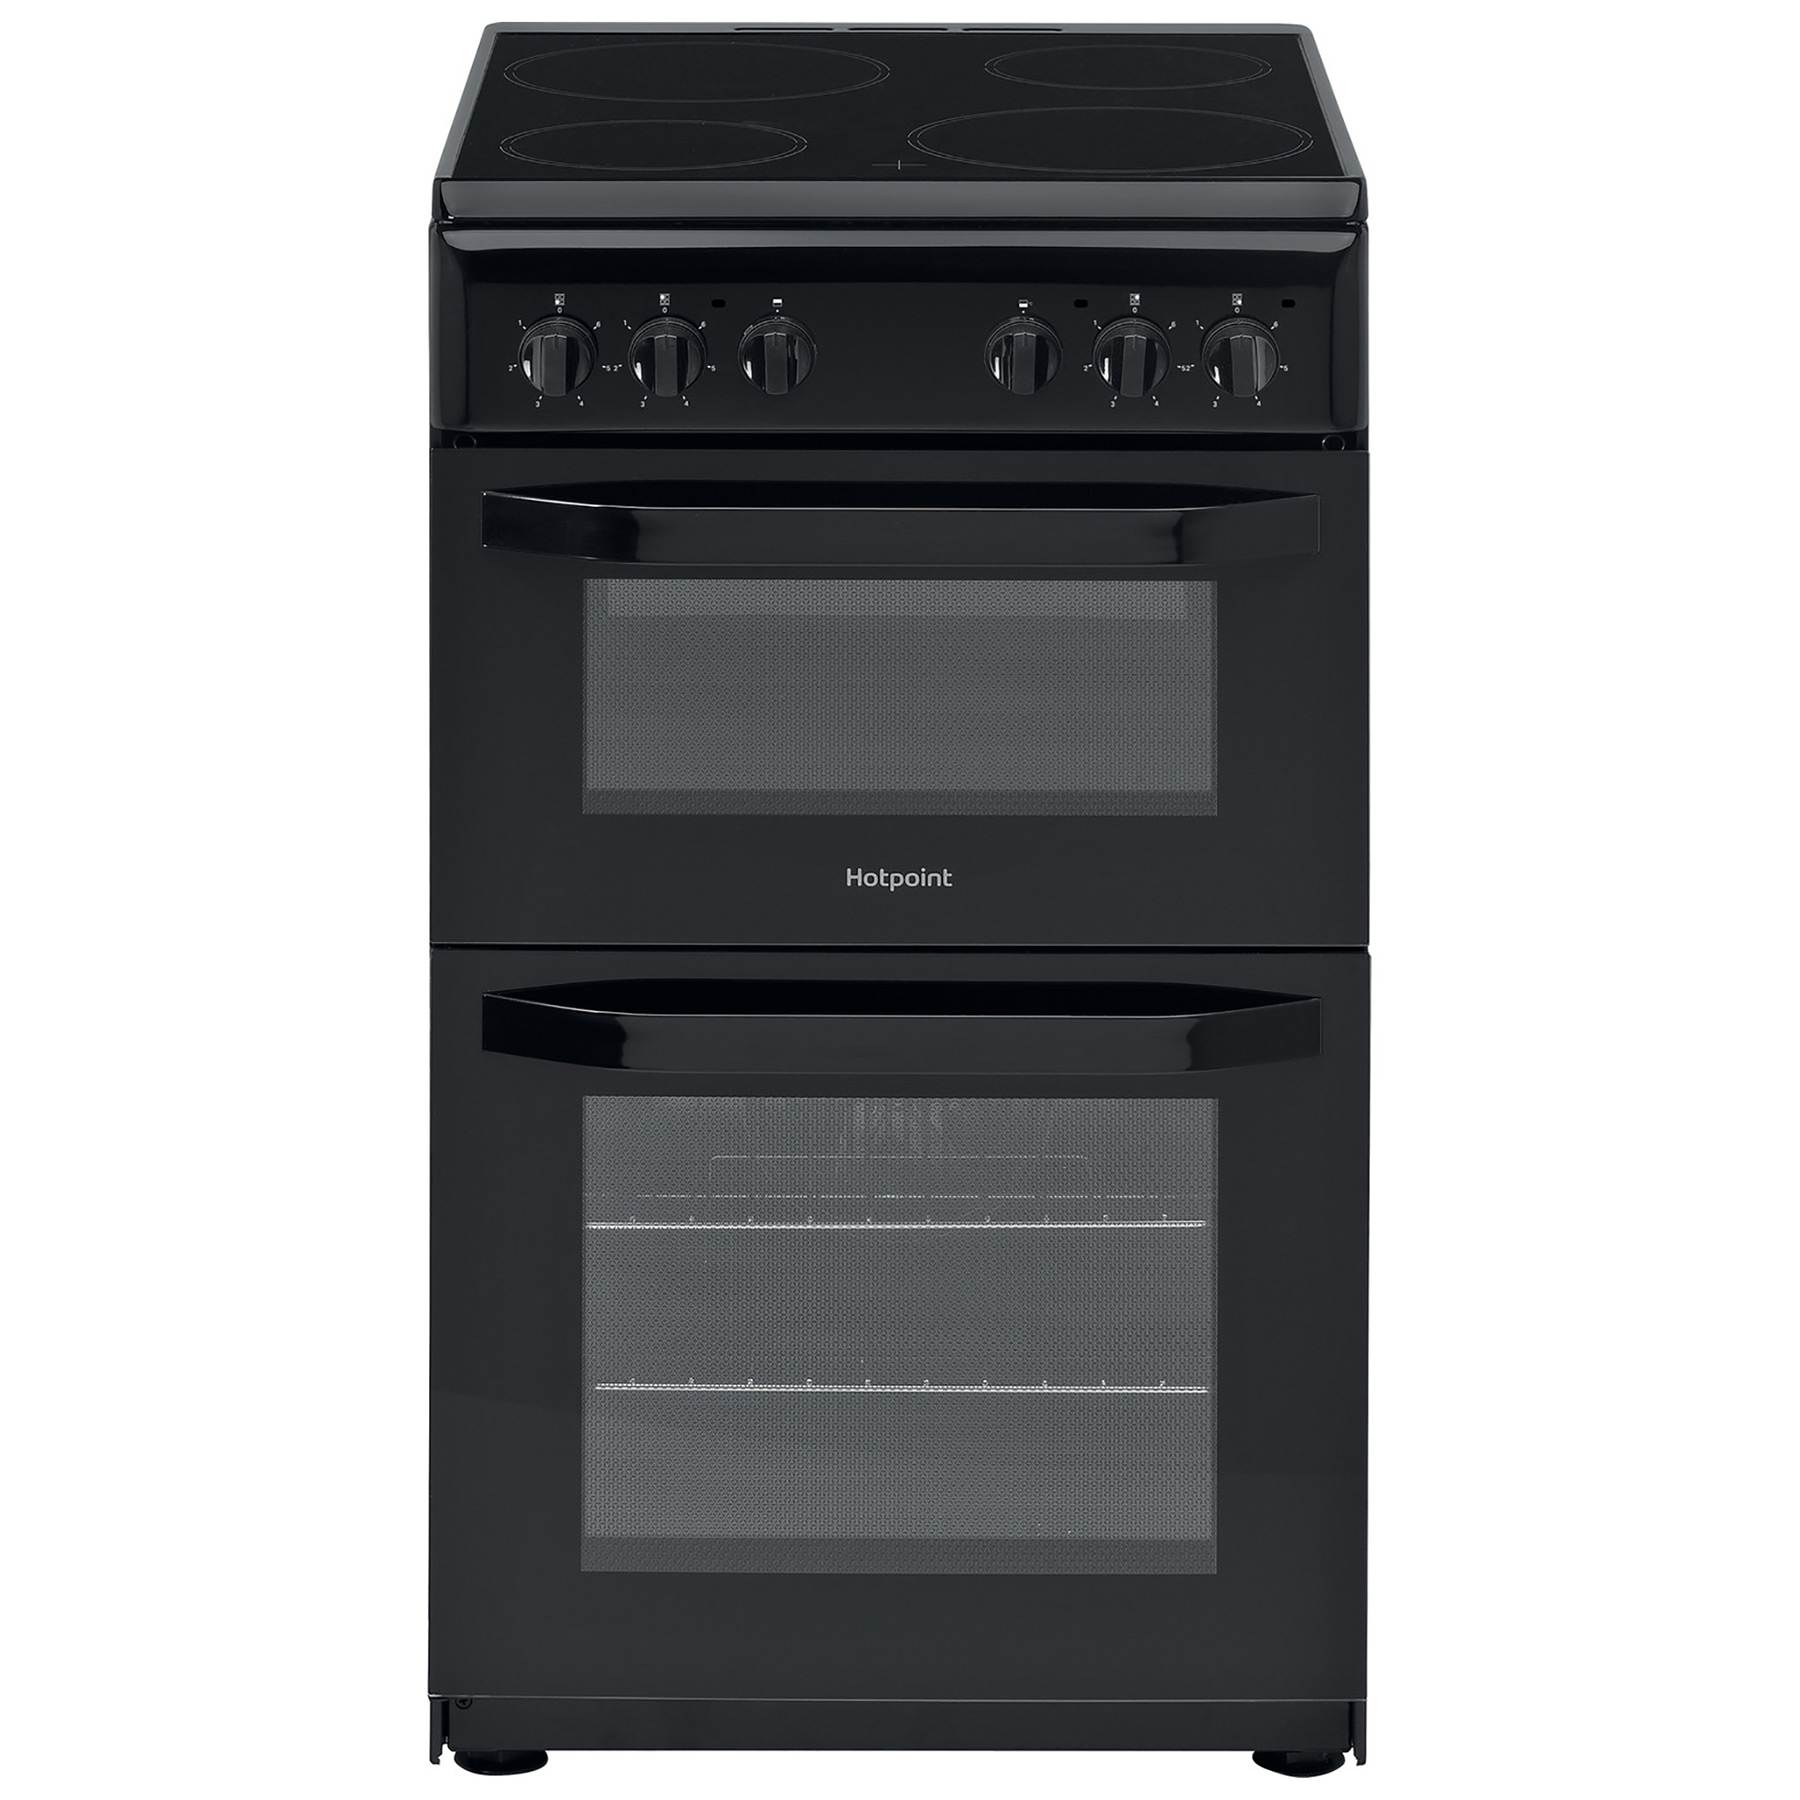 Image of Hotpoint HD5V92KCB 50cm Twin Cavity Electric Cooker in Black Ceramic H